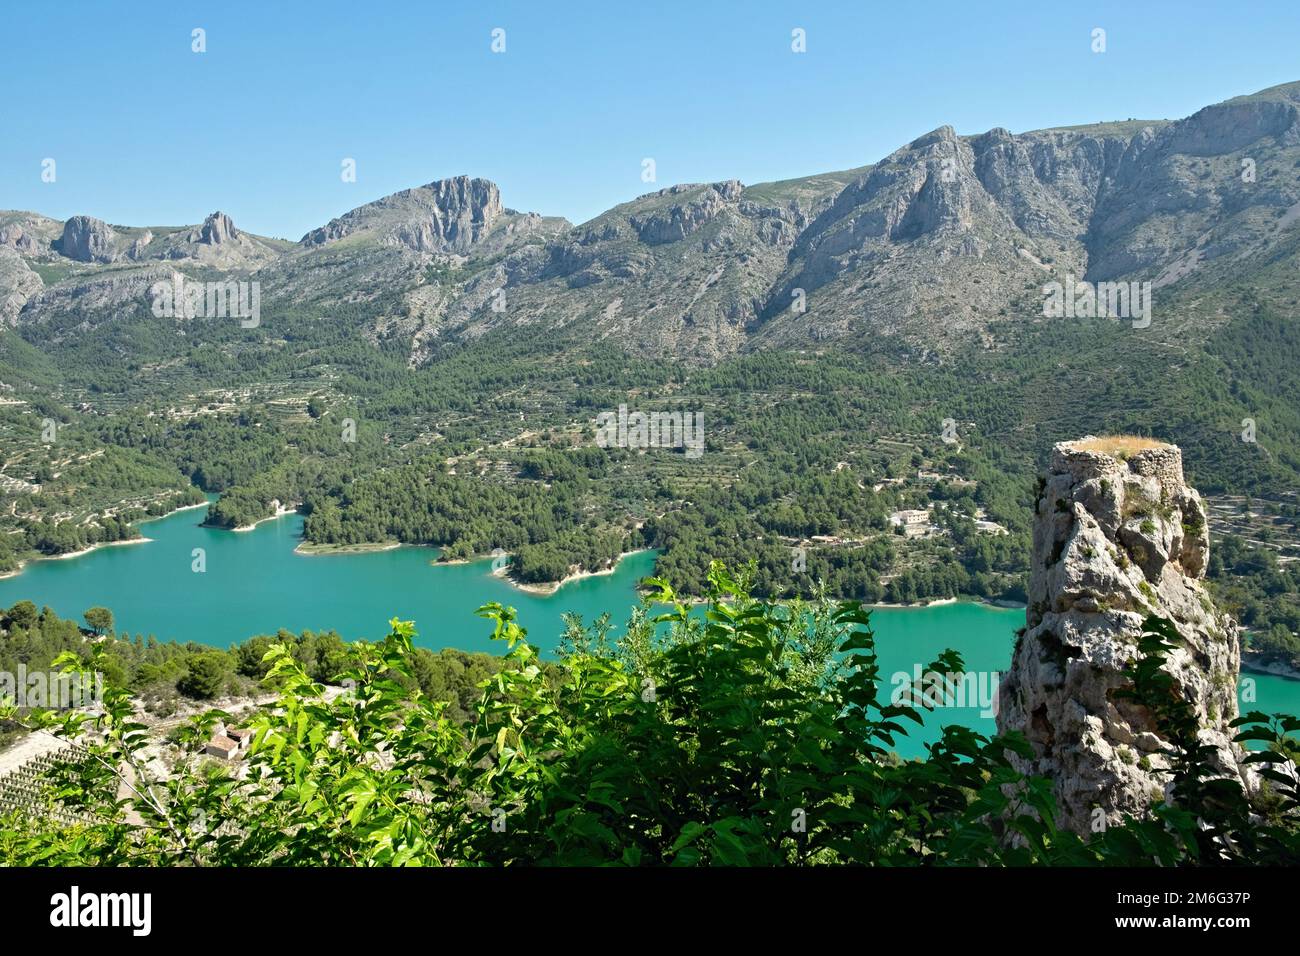 Mountains near Guadalest, Alicante - Spain Stock Photo